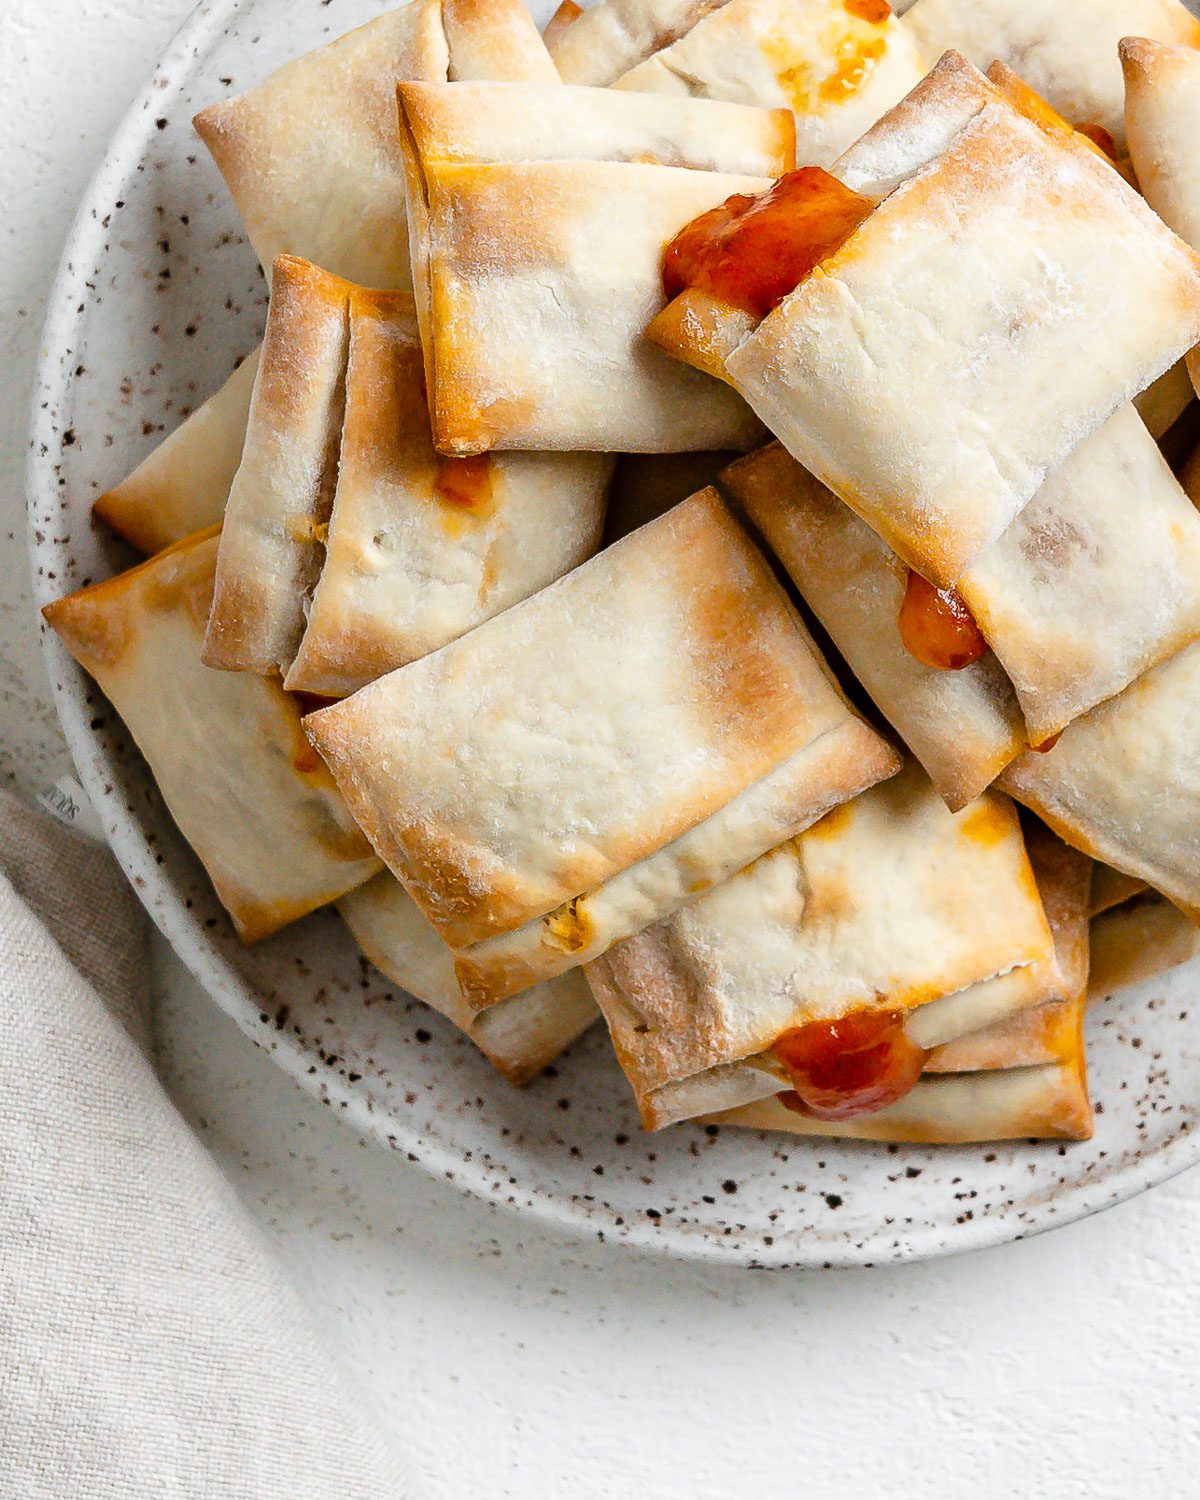 completed Air Fryer Pizza Rolls in a white speckled plate against a white background